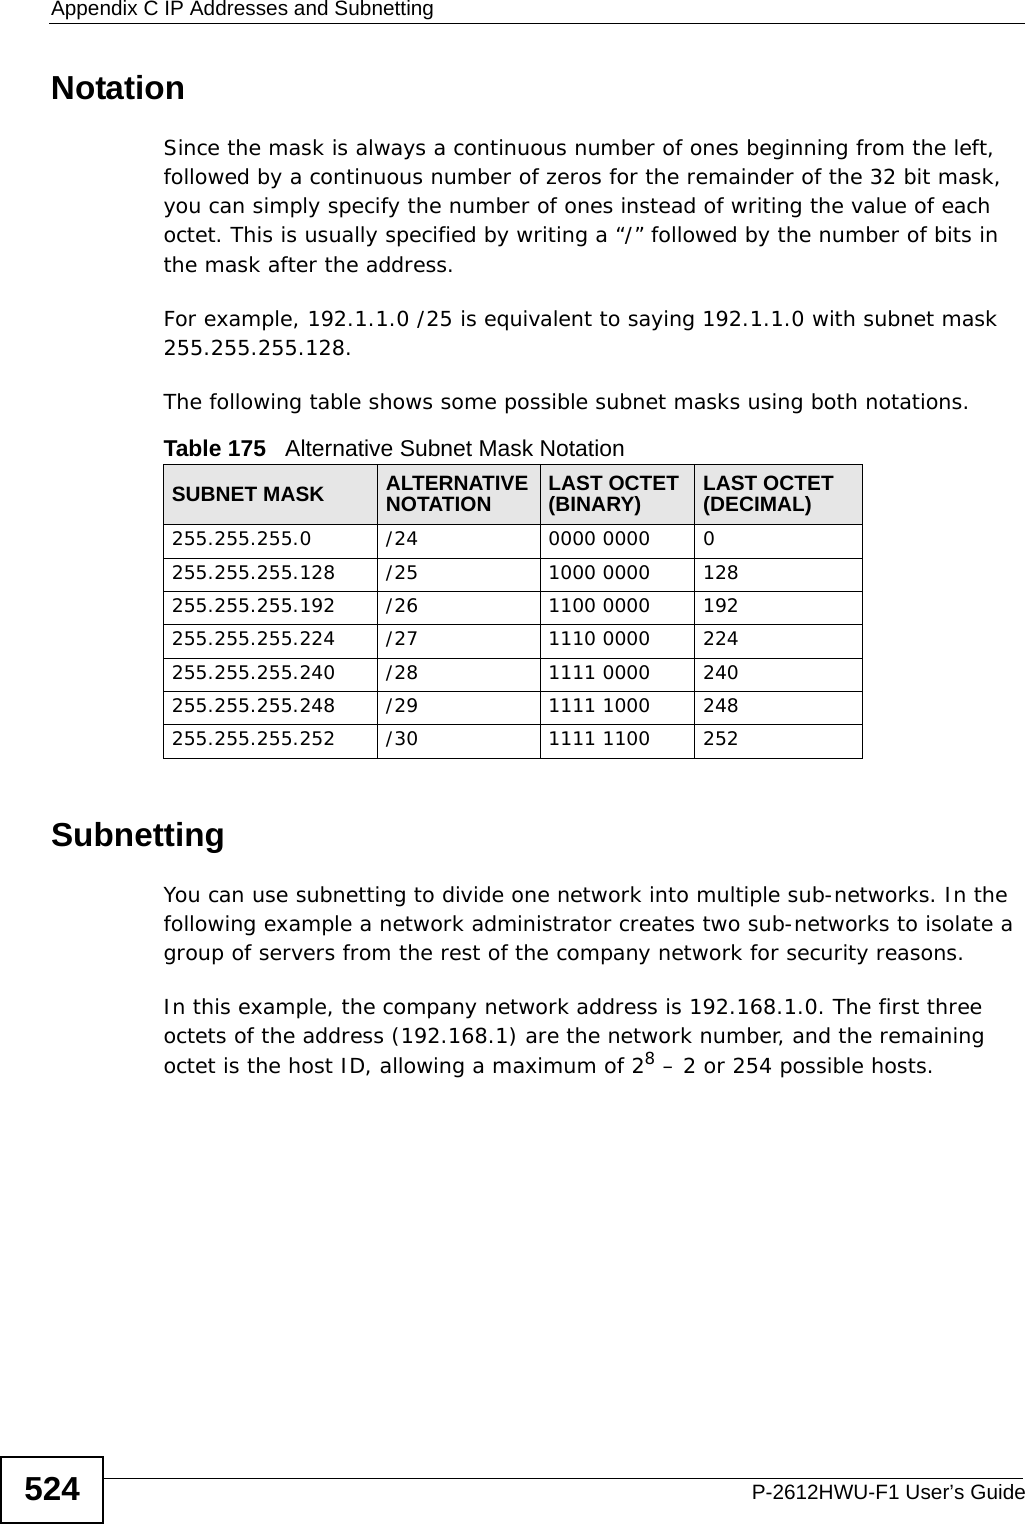 Appendix C IP Addresses and SubnettingP-2612HWU-F1 User’s Guide524NotationSince the mask is always a continuous number of ones beginning from the left, followed by a continuous number of zeros for the remainder of the 32 bit mask, you can simply specify the number of ones instead of writing the value of each octet. This is usually specified by writing a “/” followed by the number of bits in the mask after the address. For example, 192.1.1.0 /25 is equivalent to saying 192.1.1.0 with subnet mask 255.255.255.128. The following table shows some possible subnet masks using both notations. SubnettingYou can use subnetting to divide one network into multiple sub-networks. In the following example a network administrator creates two sub-networks to isolate a group of servers from the rest of the company network for security reasons.In this example, the company network address is 192.168.1.0. The first three octets of the address (192.168.1) are the network number, and the remaining octet is the host ID, allowing a maximum of 28 – 2 or 254 possible hosts.Table 175   Alternative Subnet Mask NotationSUBNET MASK ALTERNATIVE NOTATION LAST OCTET (BINARY) LAST OCTET (DECIMAL)255.255.255.0 /24 0000 0000 0255.255.255.128 /25 1000 0000 128255.255.255.192 /26 1100 0000 192255.255.255.224 /27 1110 0000 224255.255.255.240 /28 1111 0000 240255.255.255.248 /29 1111 1000 248255.255.255.252 /30 1111 1100 252